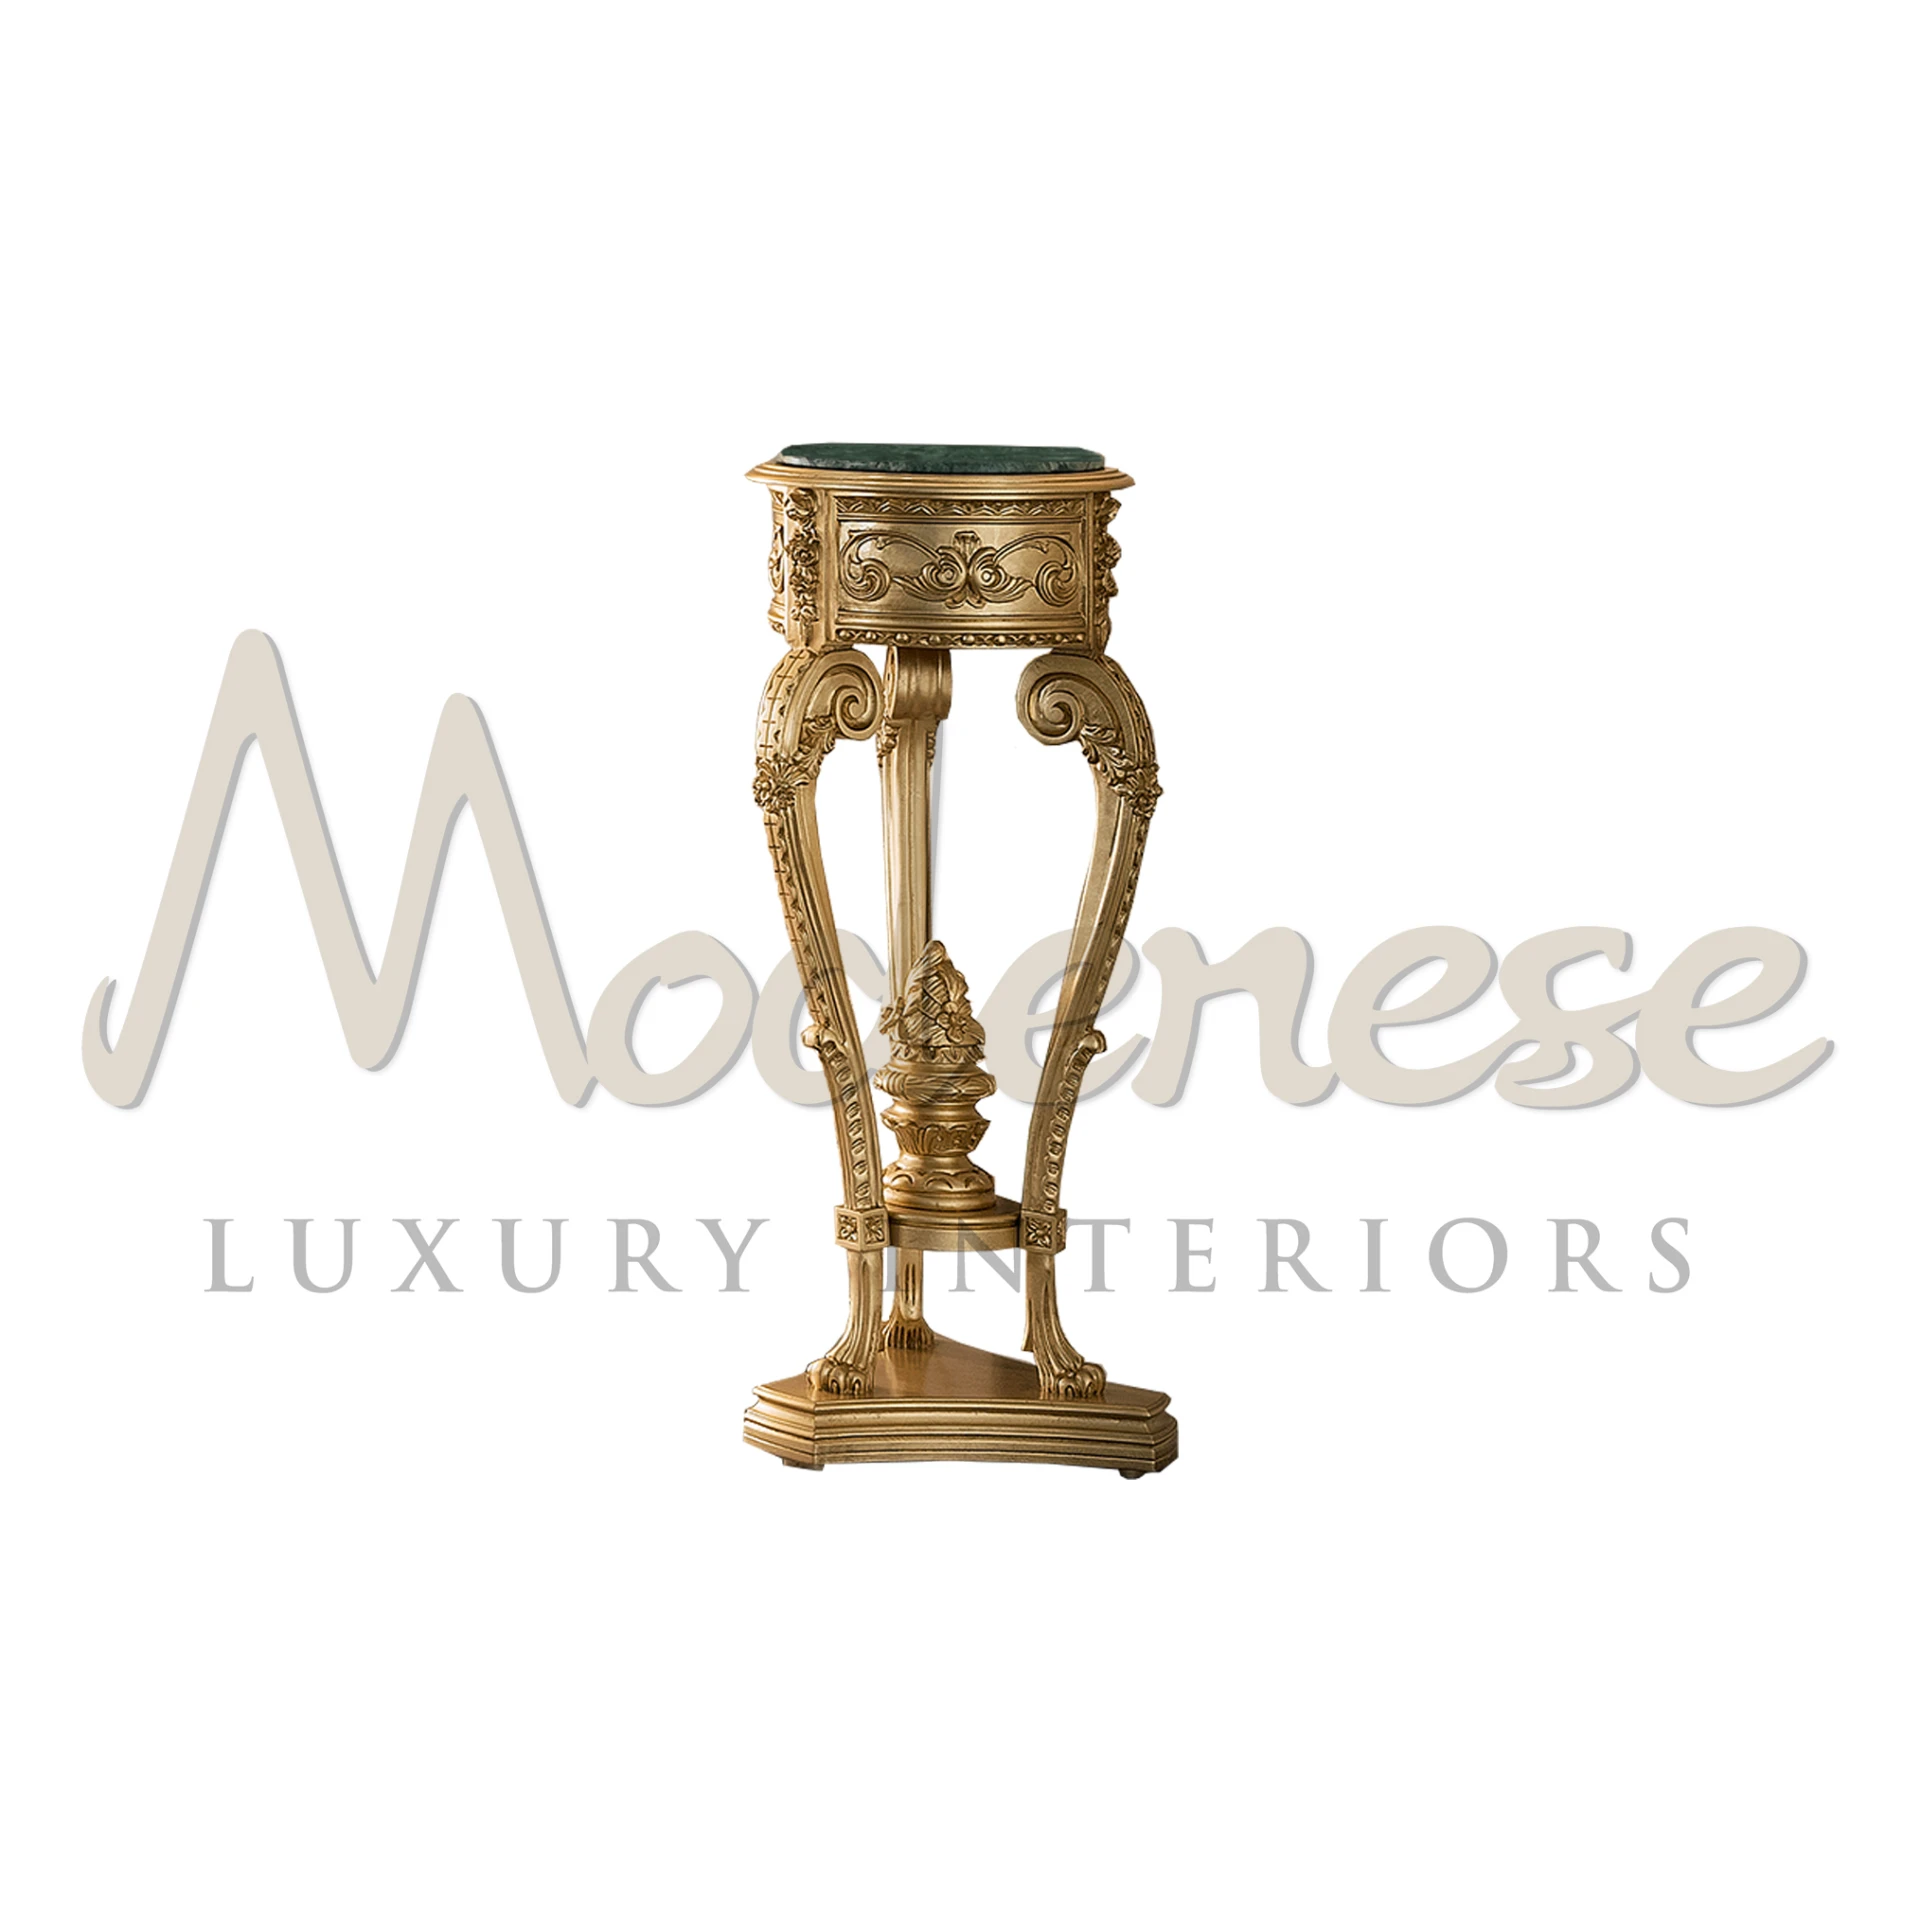 Art Deco Pedestal with Gold Leaf Finishing and Emperador Dark Marble Top
